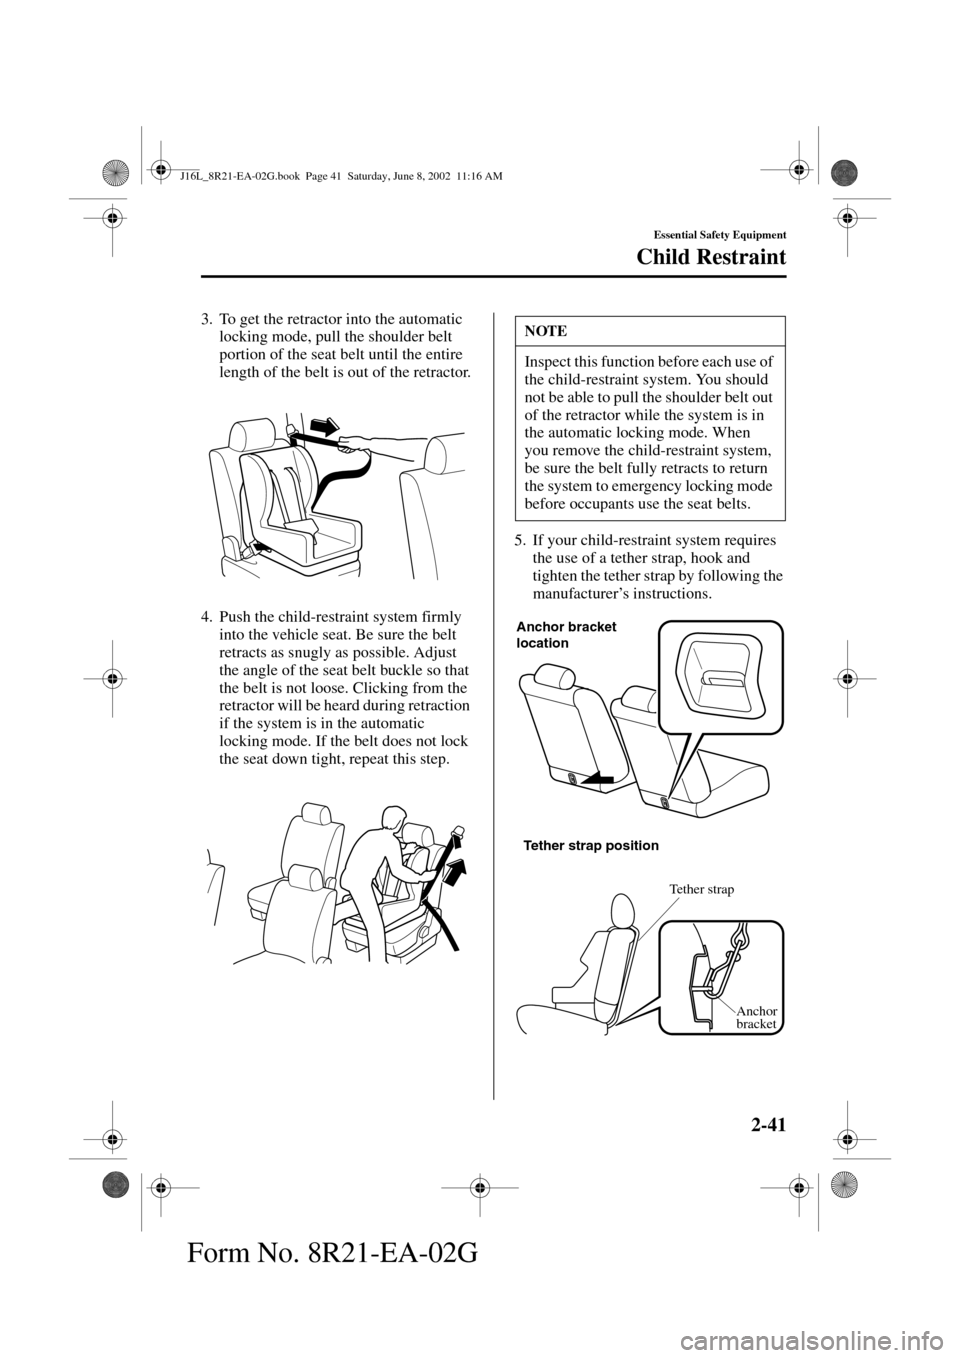 MAZDA MODEL MPV 2003  Owners Manual (in English) 2-41
Essential Safety Equipment
Child Restraint
Form No. 8R21-EA-02G
3. To get the retractor into the automatic 
locking mode, pull the shoulder belt 
portion of the seat belt until the entire 
length